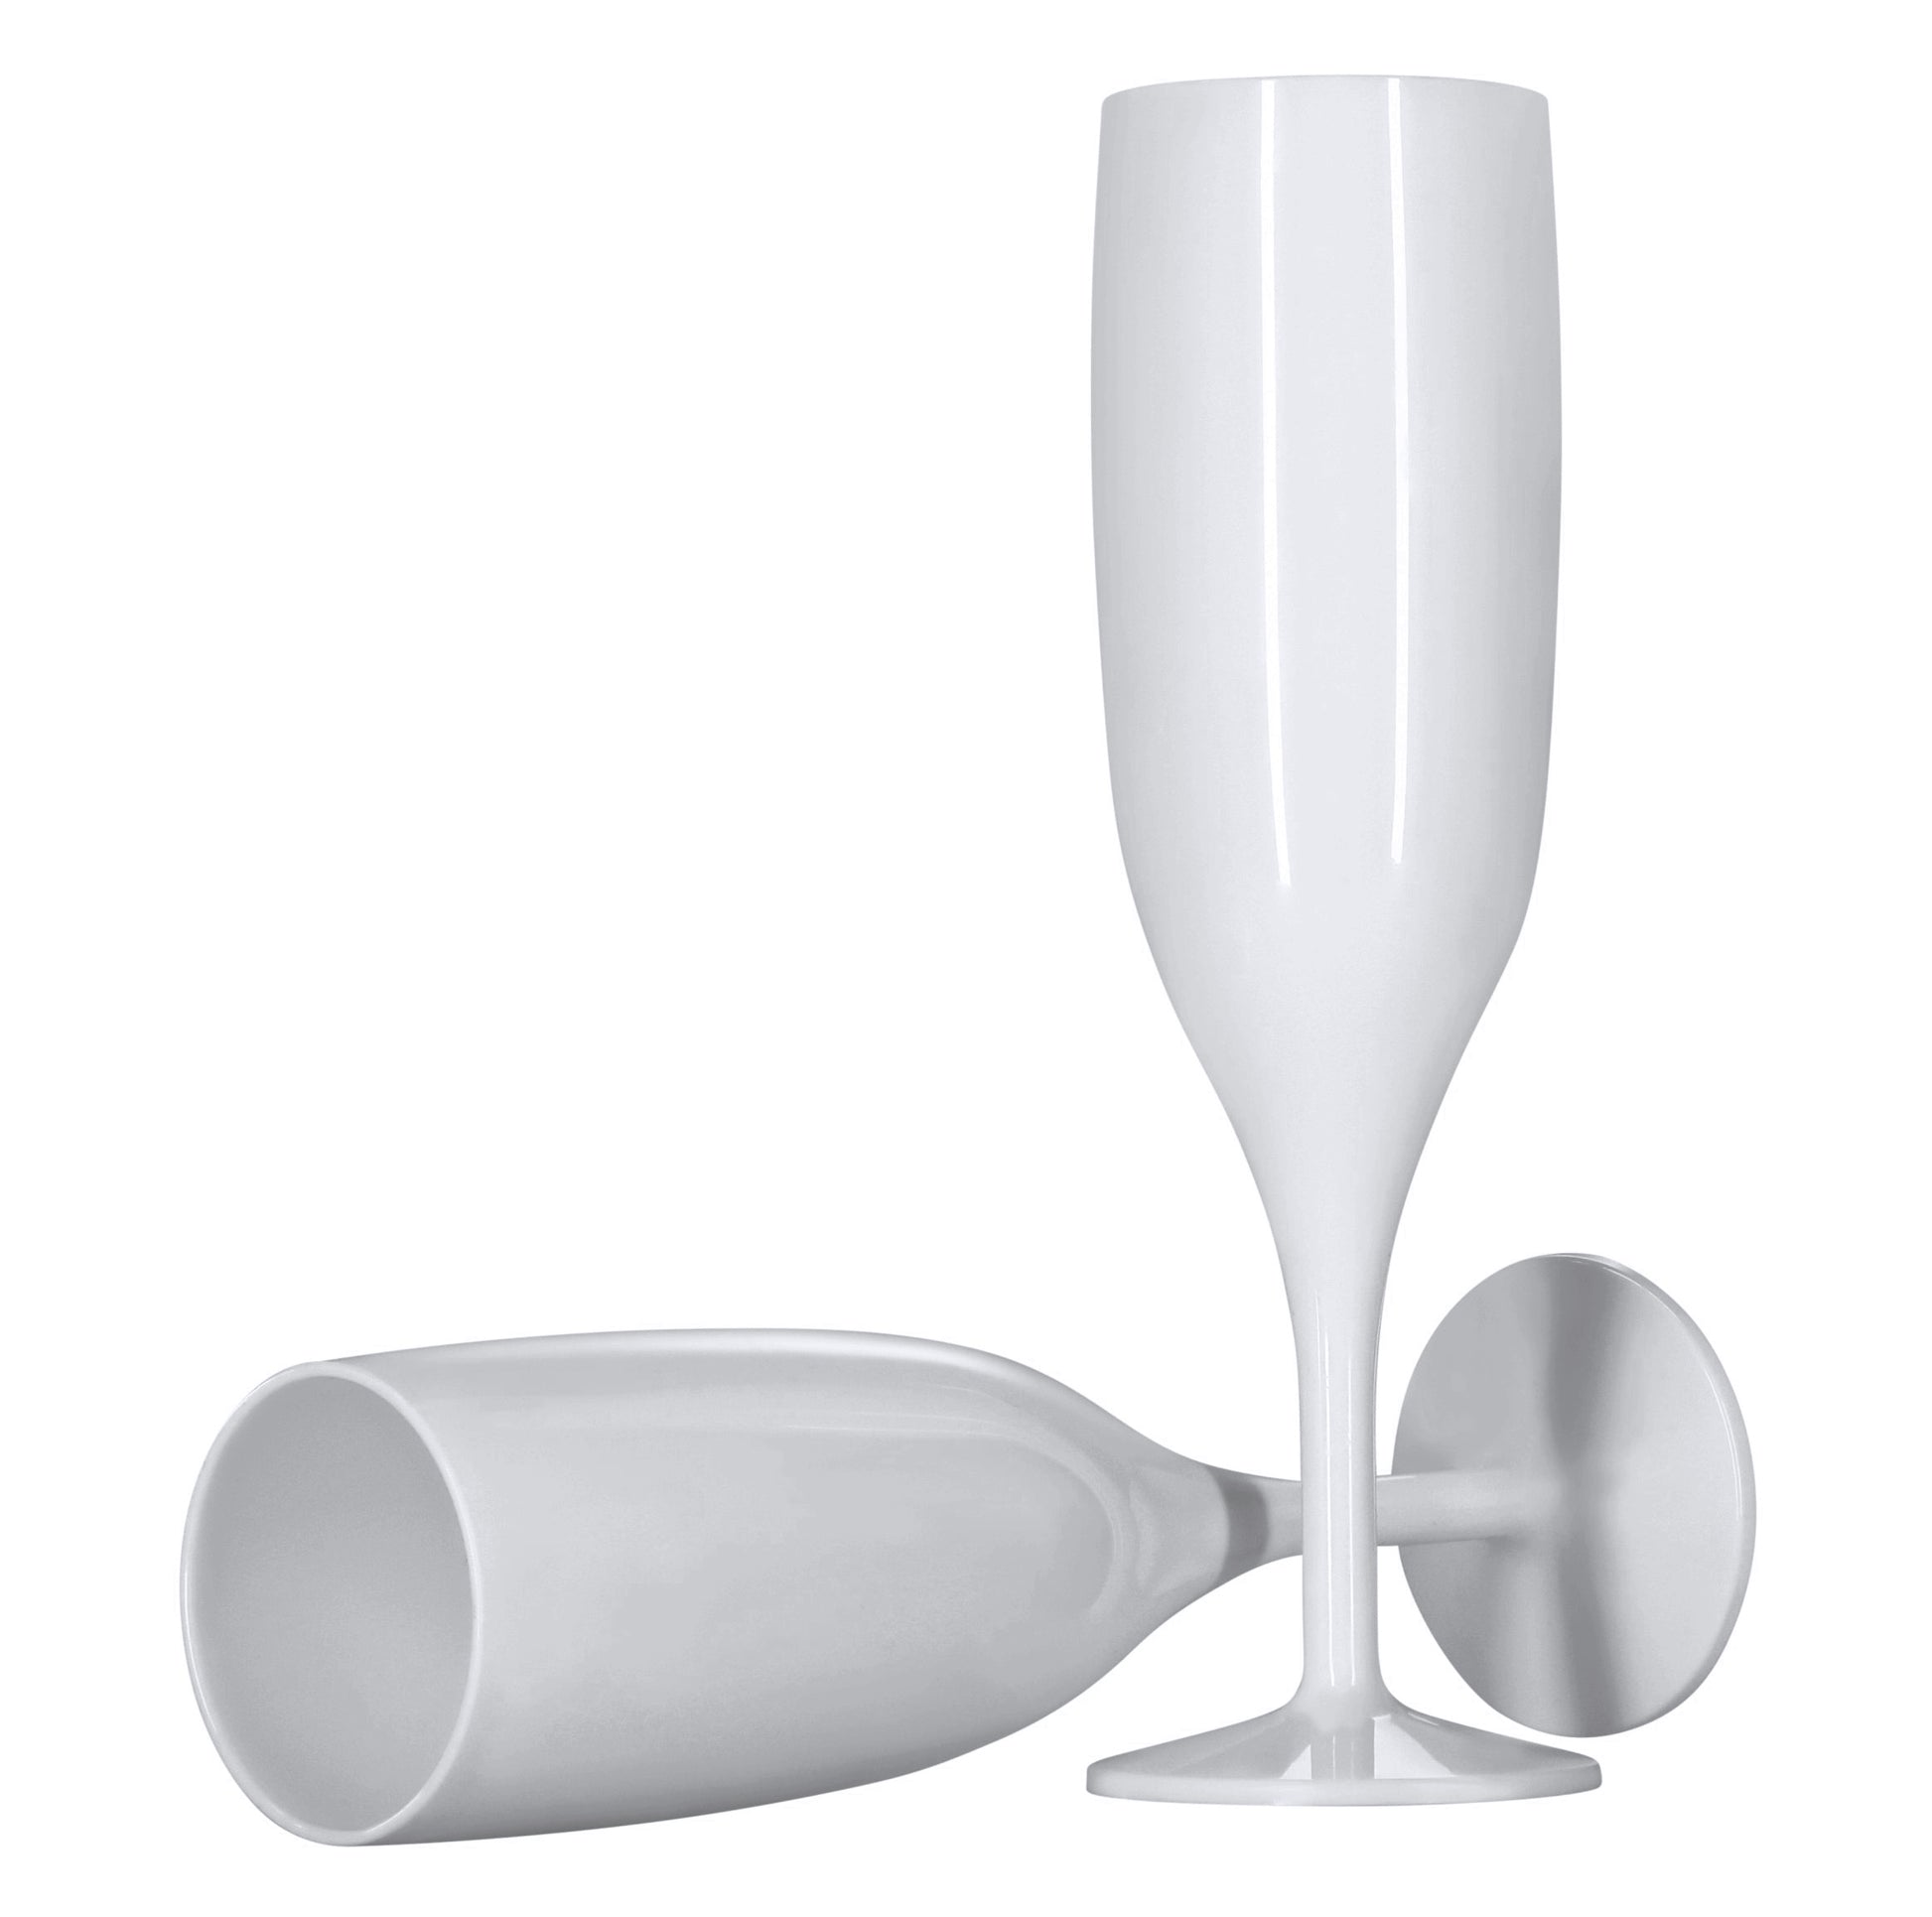 6 Flutes, 6 Wine Glasses (White) Pack of 12 Reusable Plastic Champagne Prosecco 175ml 300ml Strong Glossy Bright 1-Piece Dishwasher Safe-5056020186298-EY-PP-084-Product Pro-Flutes, White, White Champagne Glasses, White Prosecco Flutes, White Wine Glasses, Wine Glasses